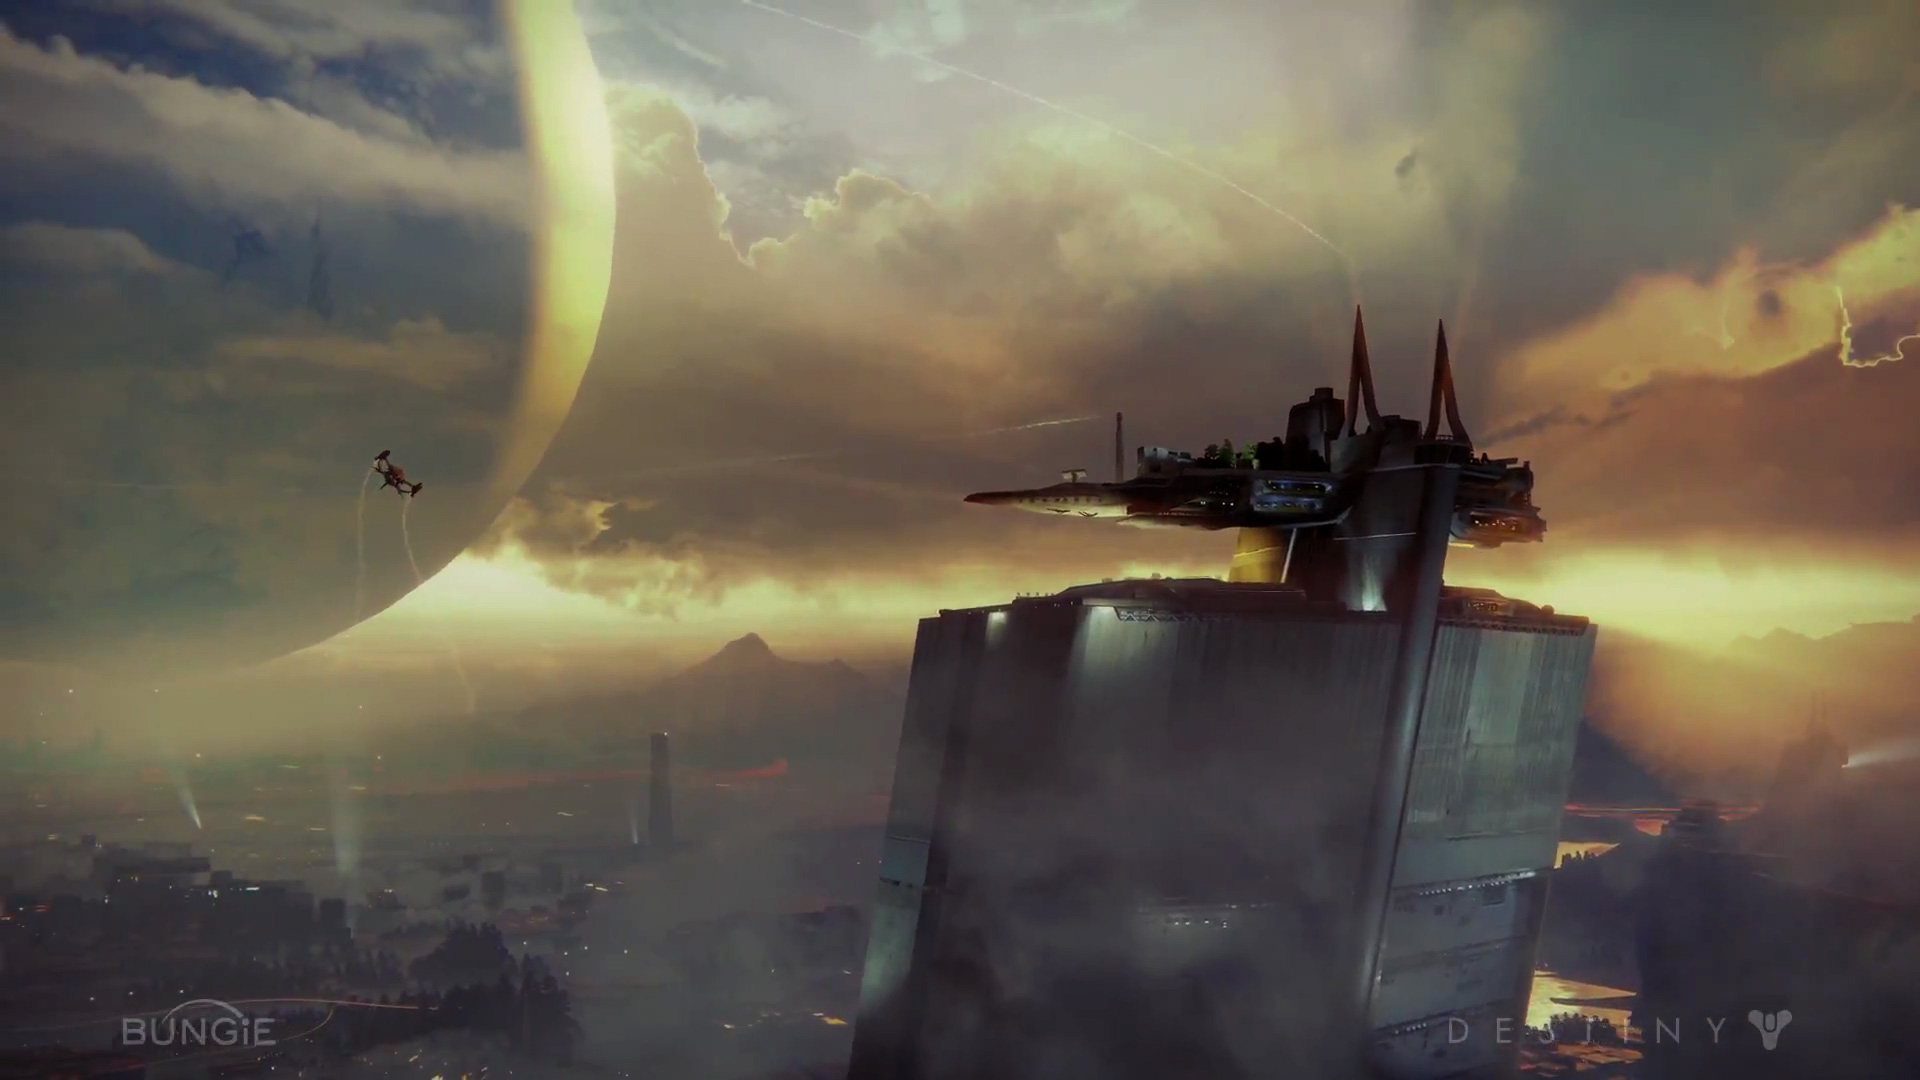 bungies-destiny-12-minutes-of-epic-gameplay-action-18.jpg